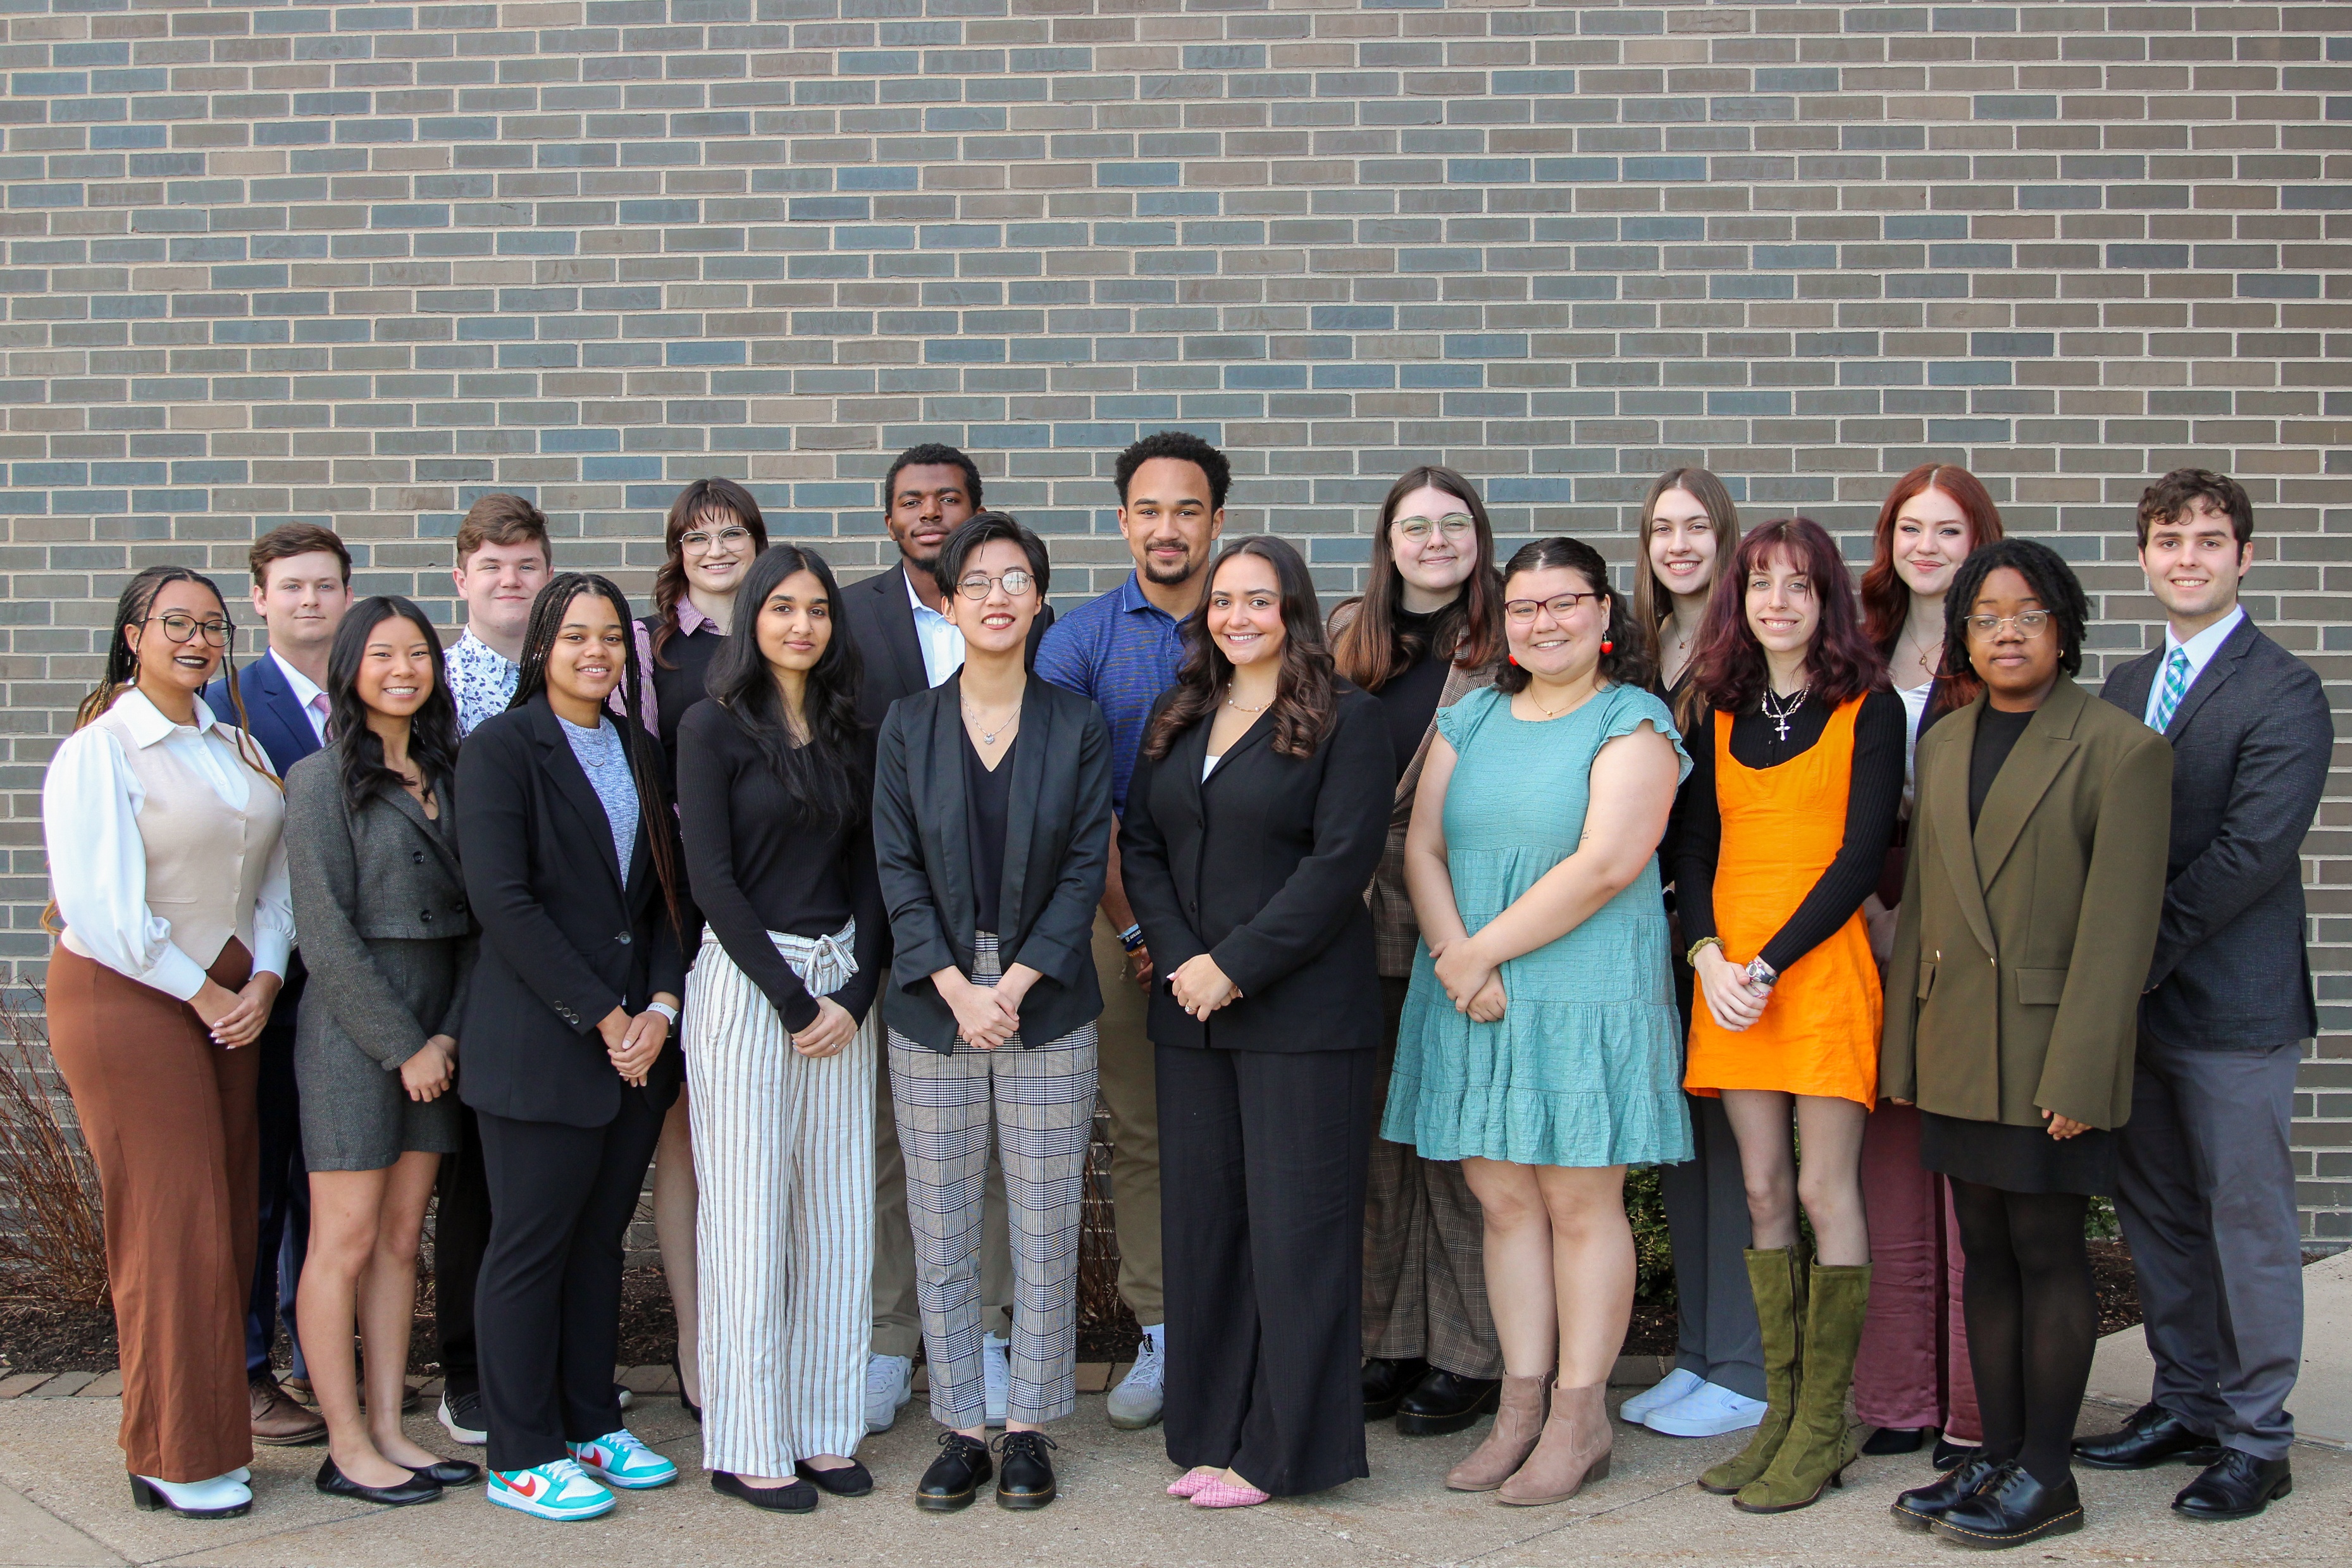 Group of 18 students dressed business professional in front of a multi-colored brick wall outside